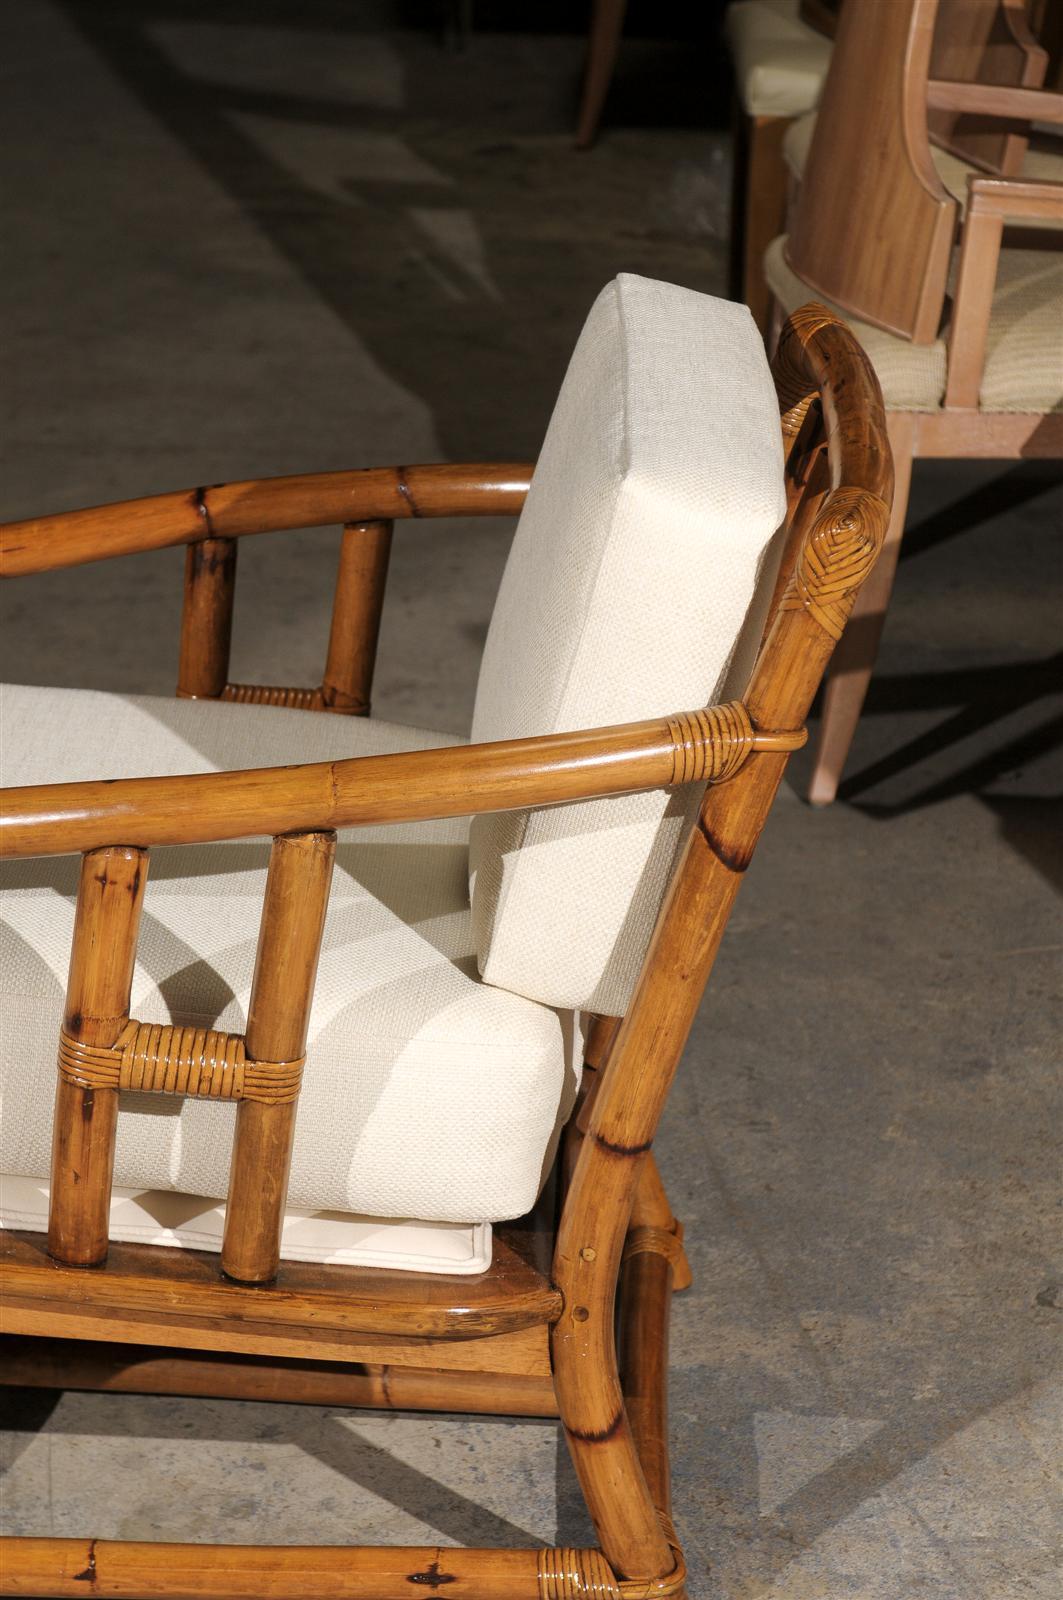 An exceptional pair vintage lounge or club chairs from a low production series by Ficks Reed, circa 1970s. Subtle Asian influence noted at the arms. Stout, expertly crafted rattan and hardwood construction with mortise and tenon joint detail. Fine,